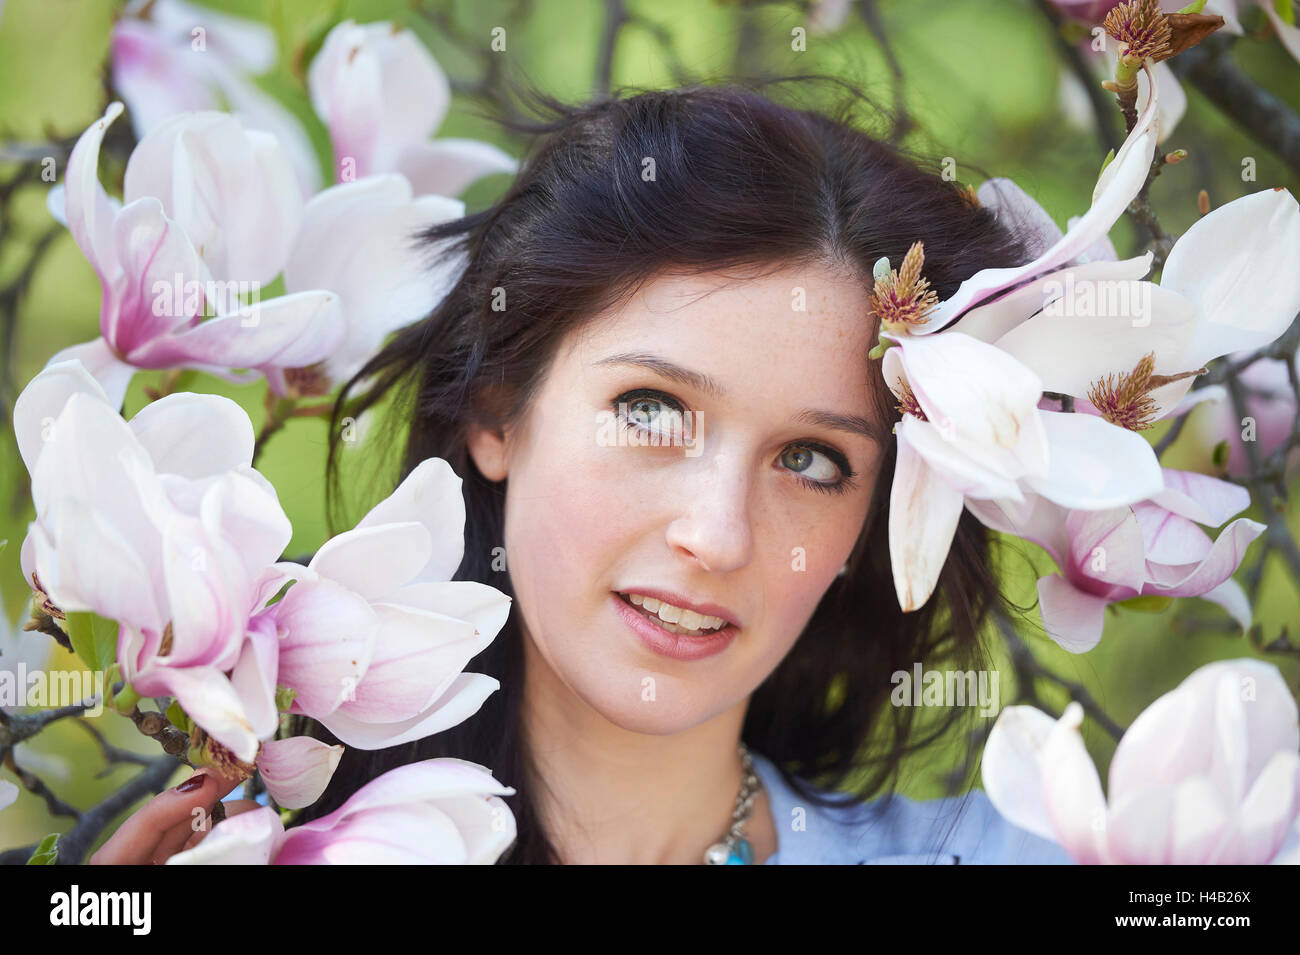 Woman, young, portrait, town park, spring, glancing sideways Stock Photo